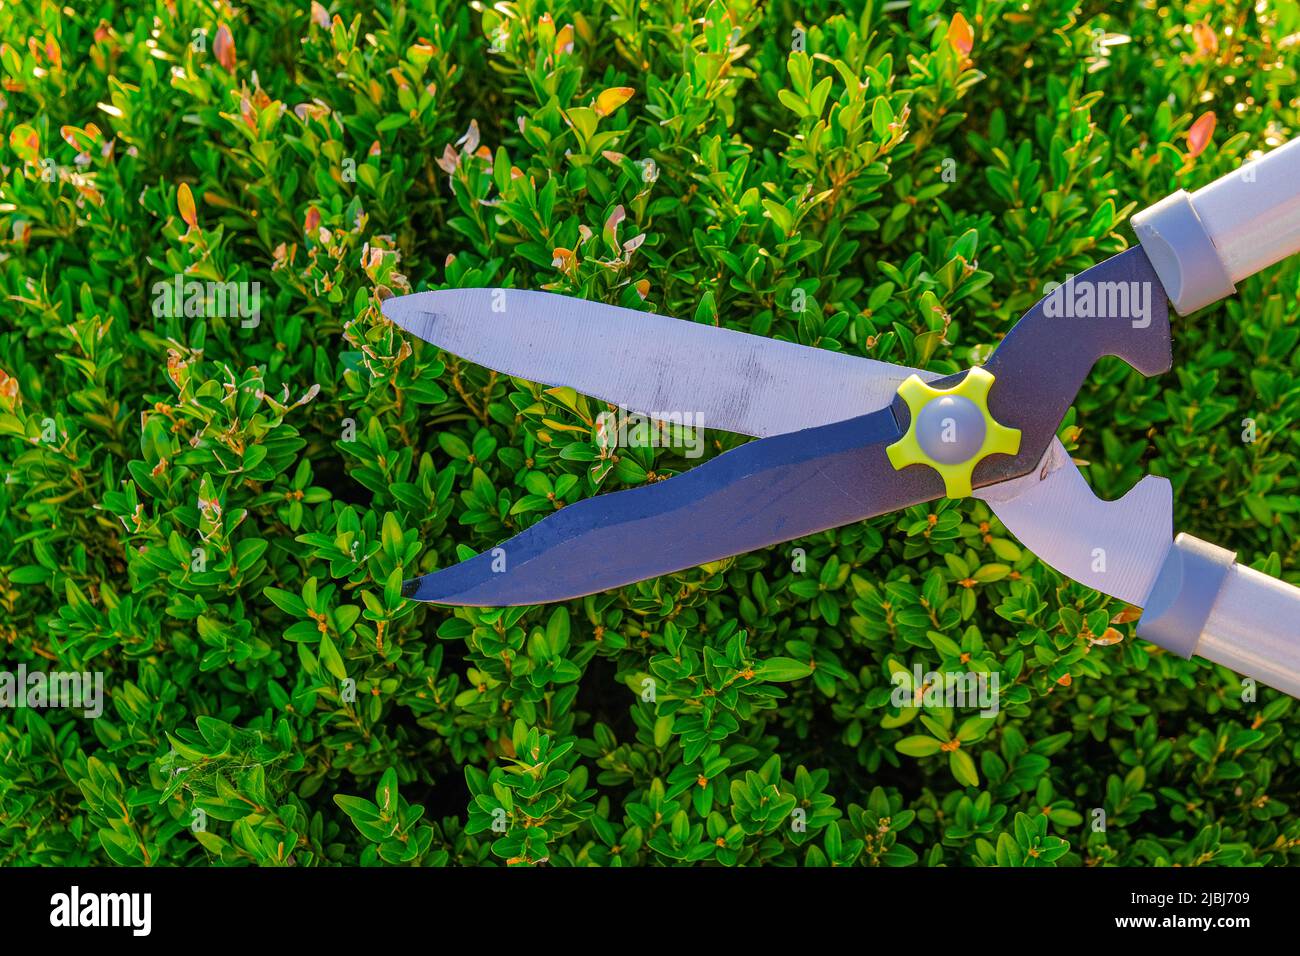 Boxwood pruning.Topiary pruning.Shearing and shaping boxwood .Plant pruning.Round shape of boxwood.Garden shears a boxwood.Tool for plant formation  Stock Photo